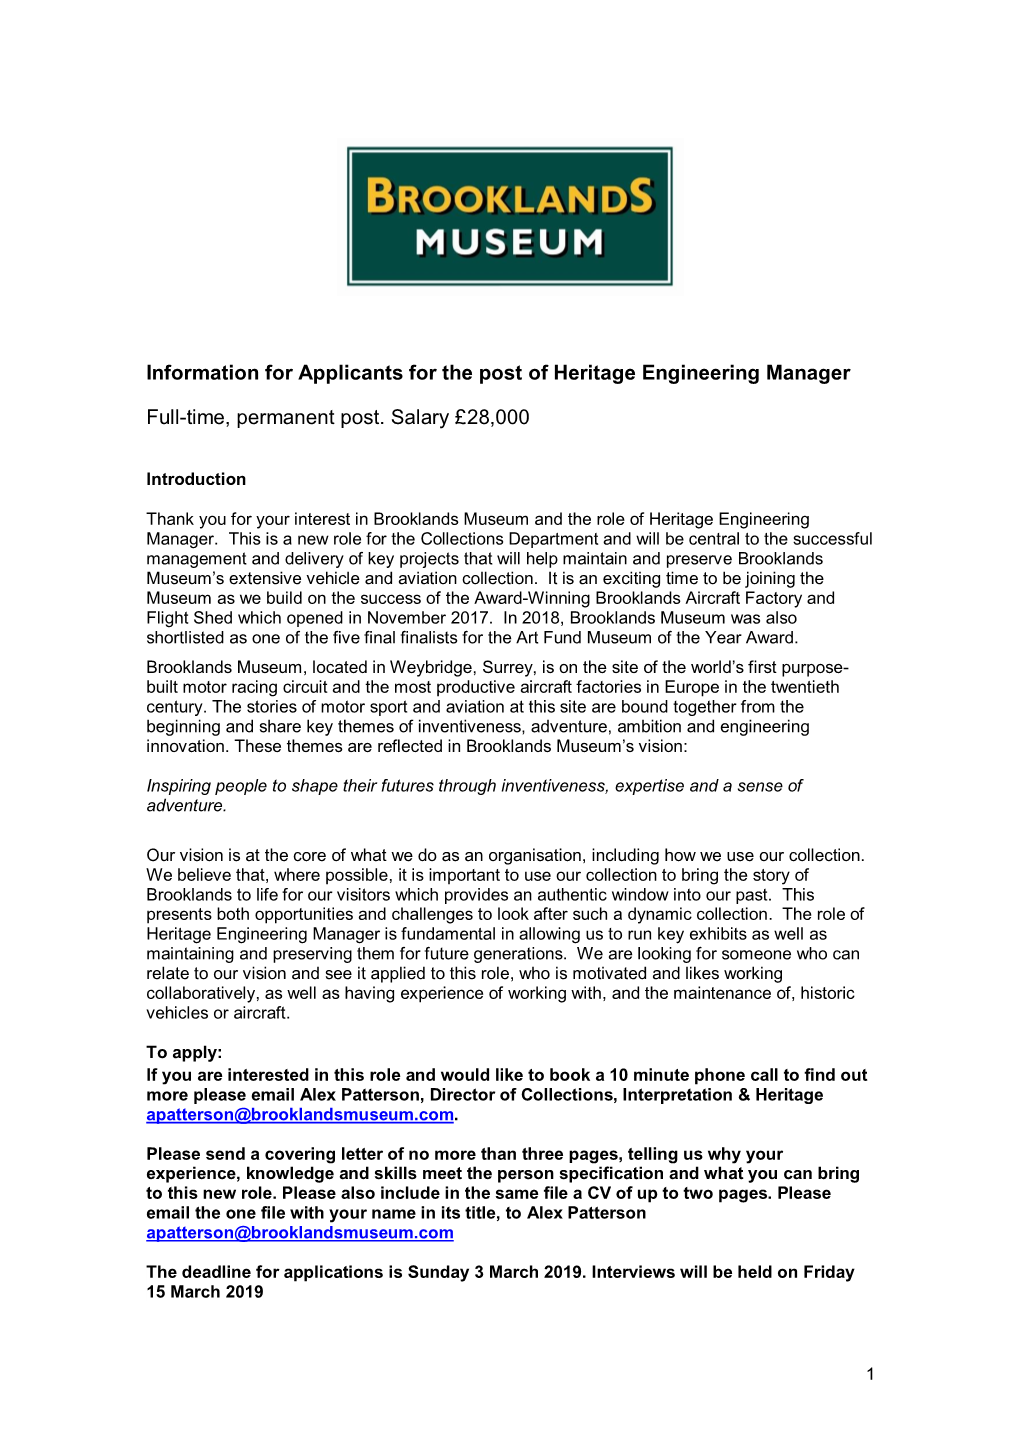 Information for Applicants for the Post of Heritage Engineering Manager